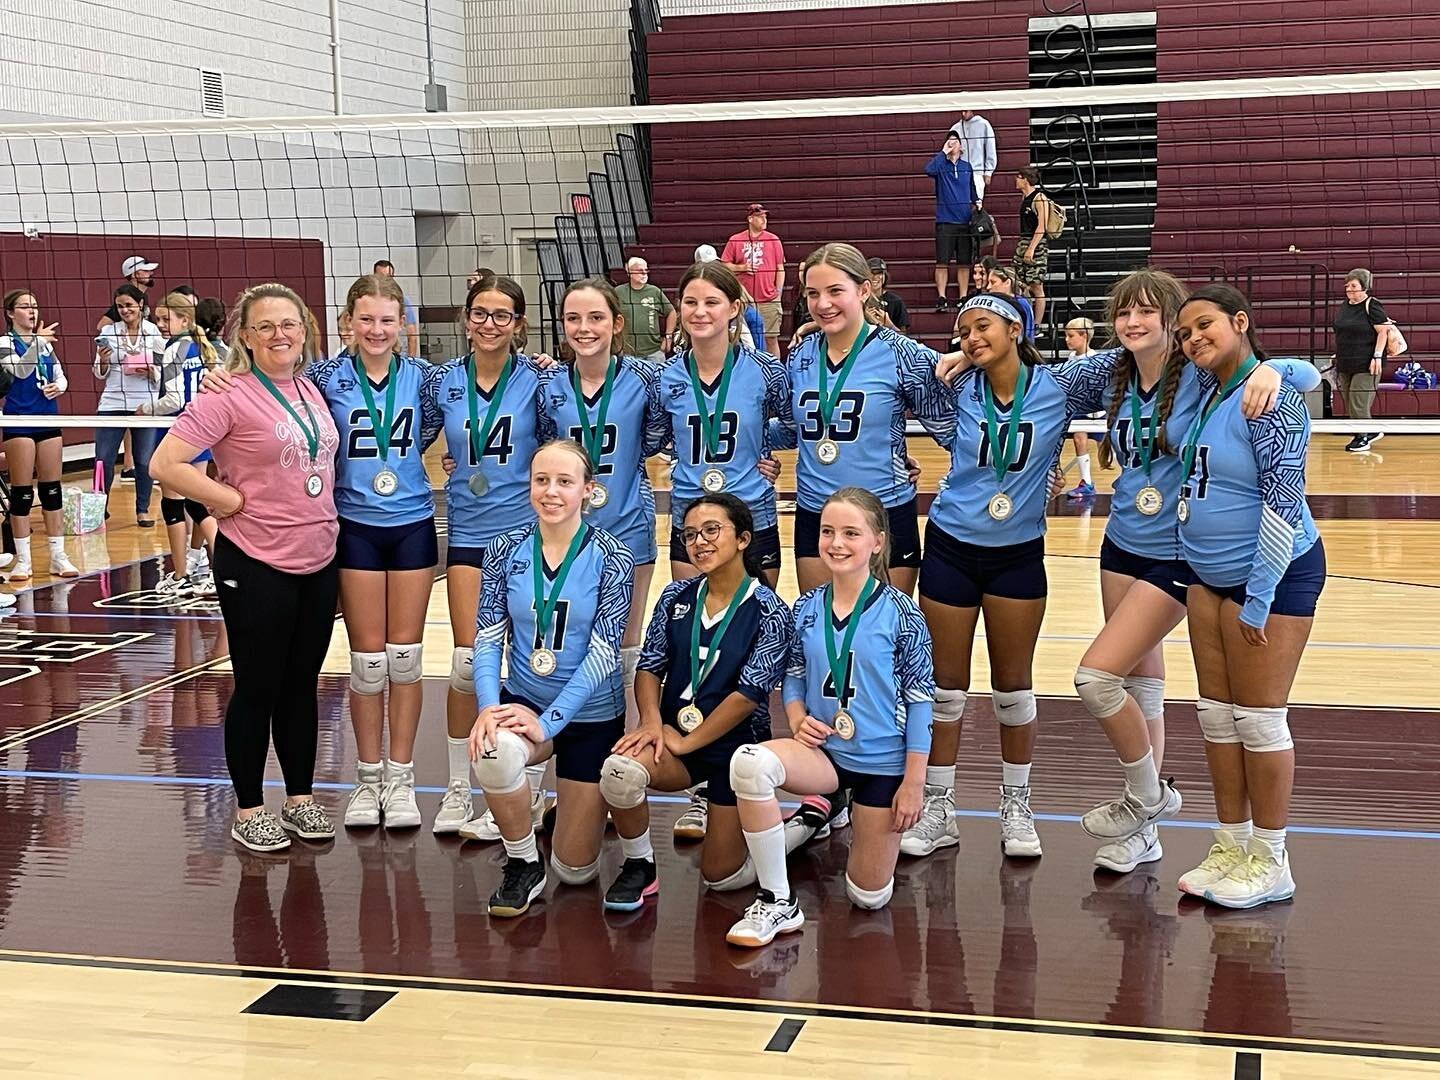 12 Karly went 4-0 and earned 1st in GOLD🥇at the SVC Spring Invitational @sarasotavolleyballclub